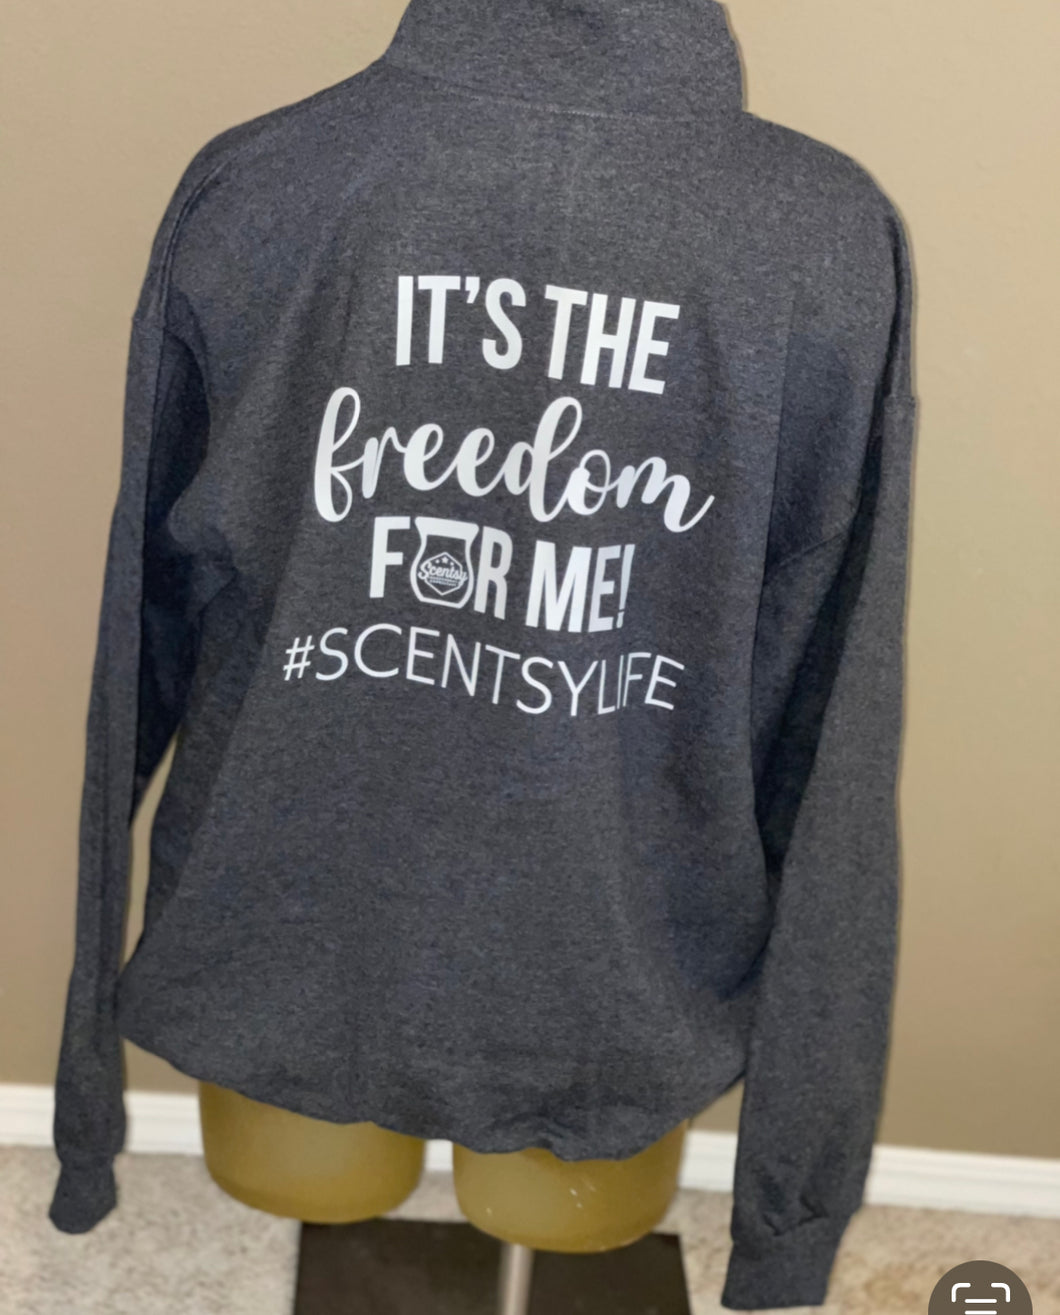 Scentsy It’s the freedom for me 1/4 zip